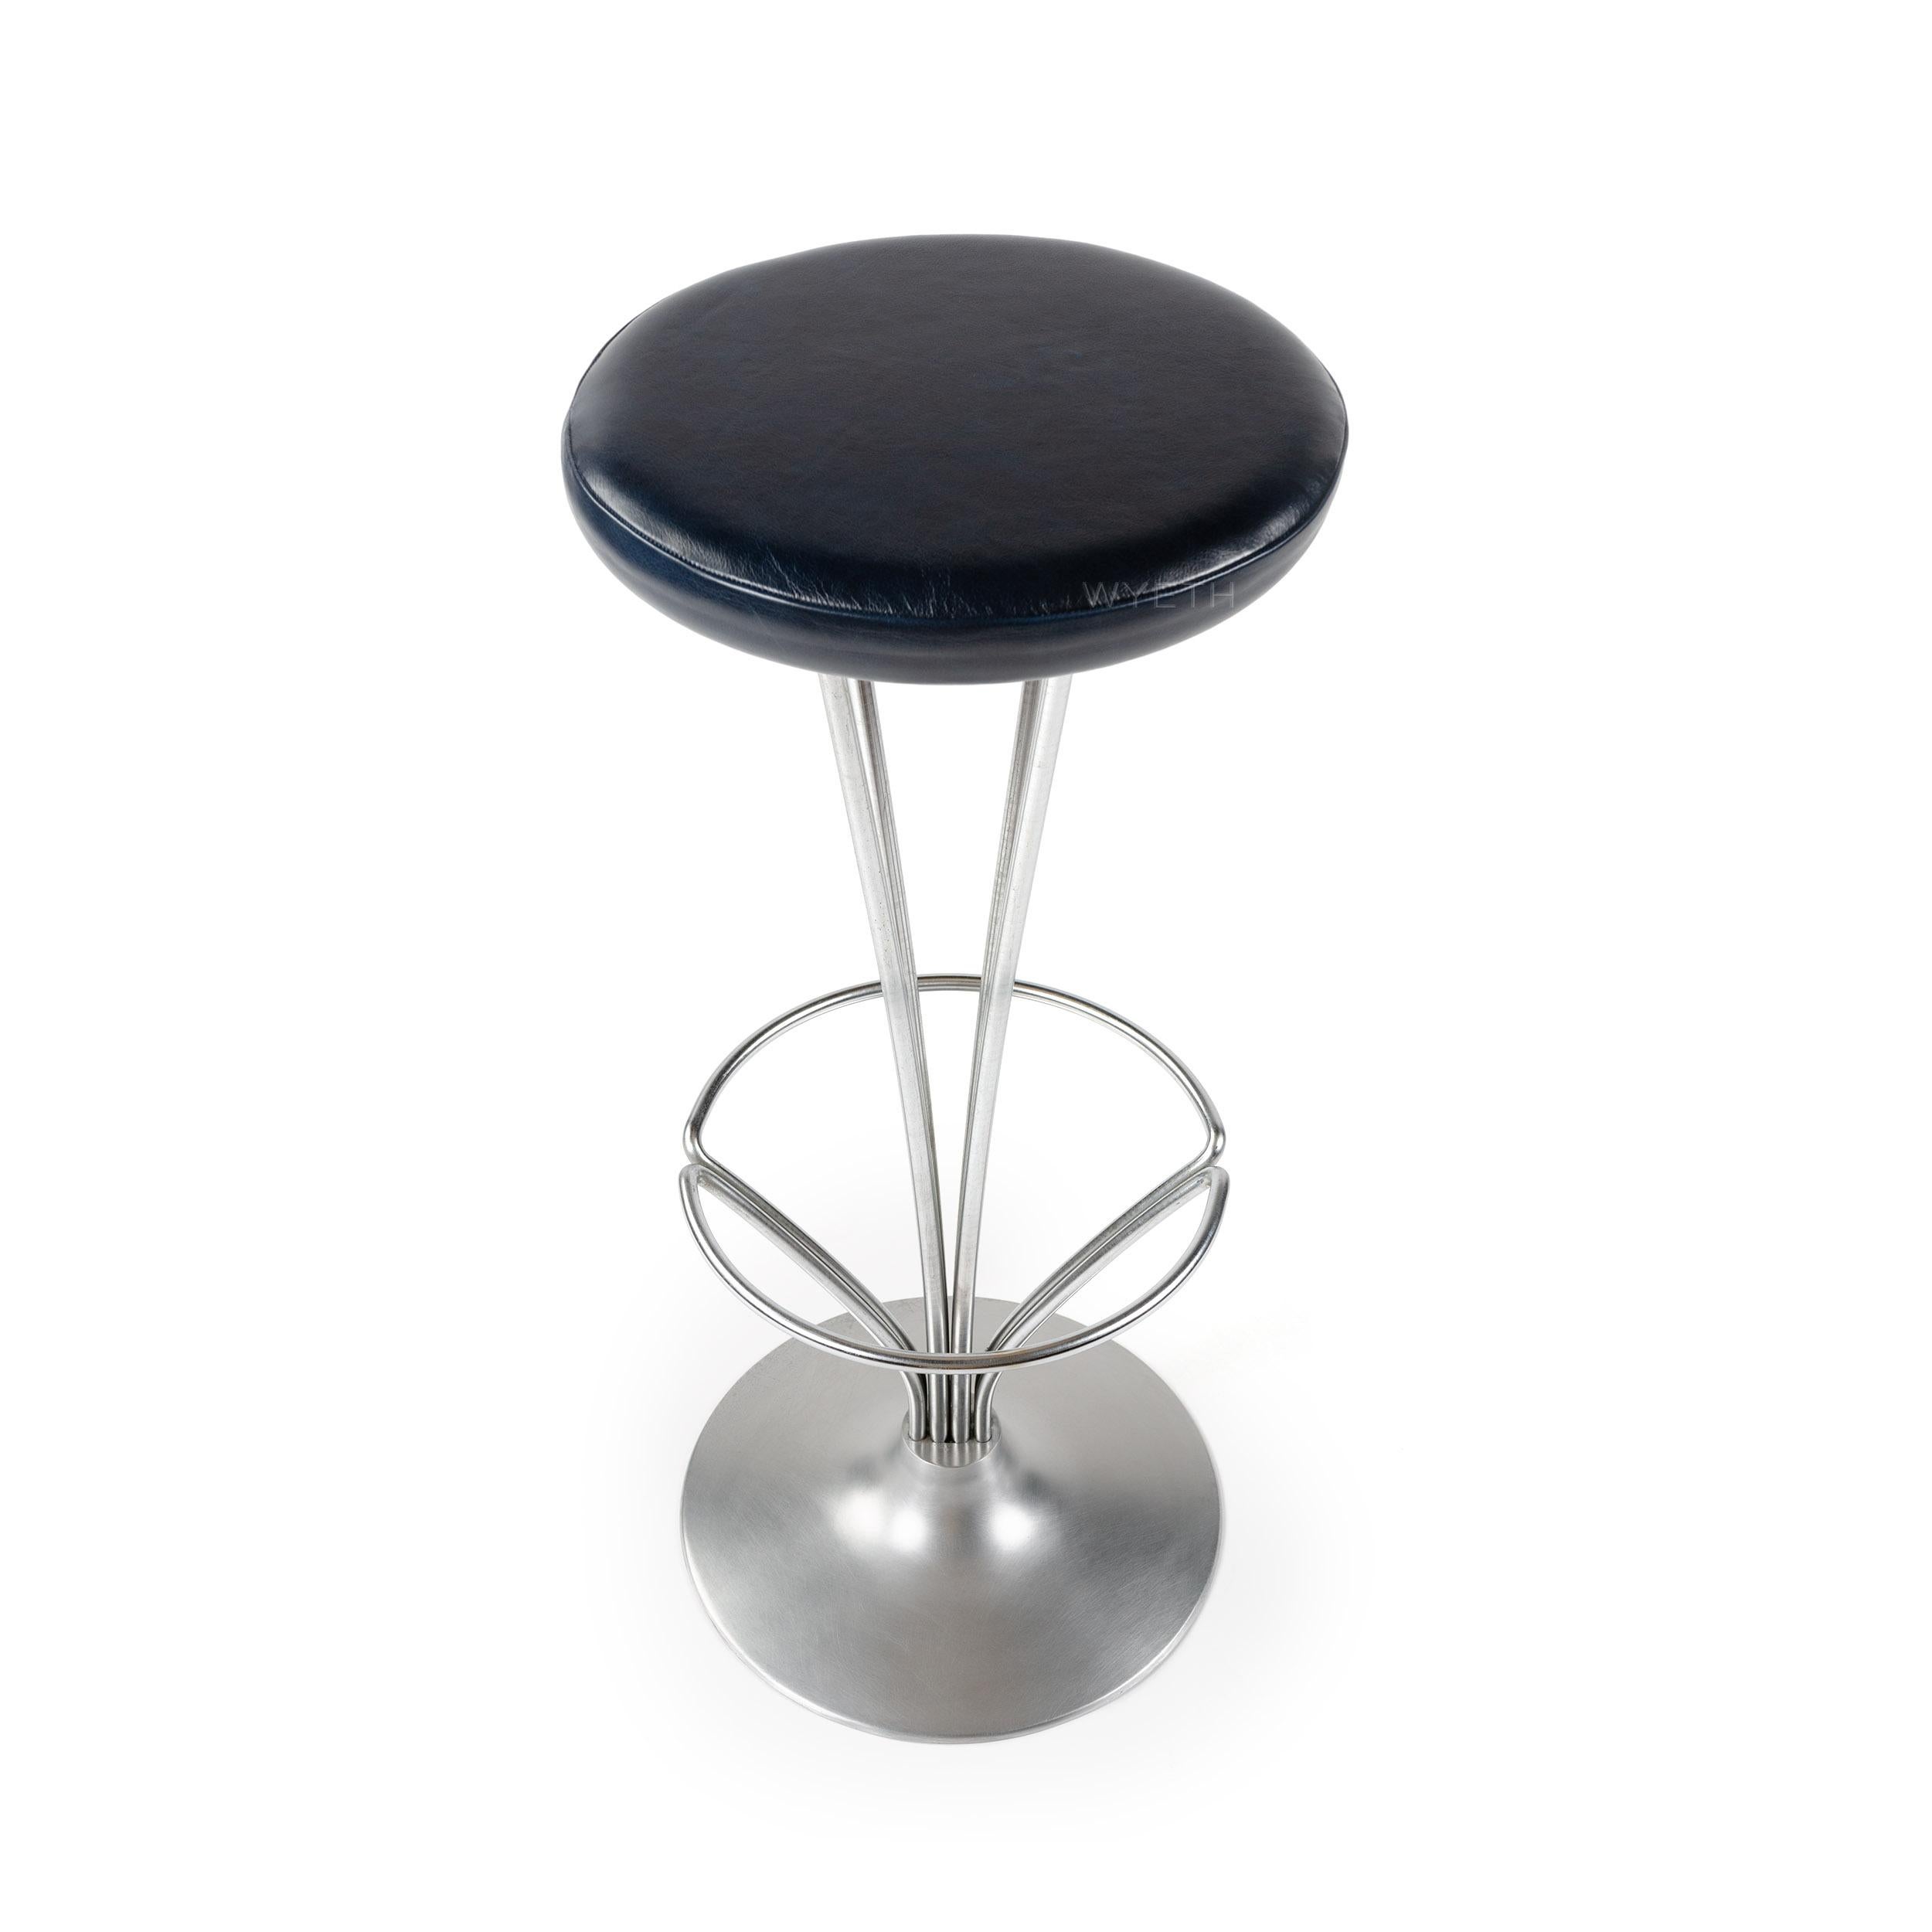 A Scandinavian Modern pedestal style barstool with satin chromed steel bars - slightly arched to support a foot rest - and upholstered seat in dark blue leather. Designed by Piet Hein and manufactured by Fritz Hansen in the 1960s.